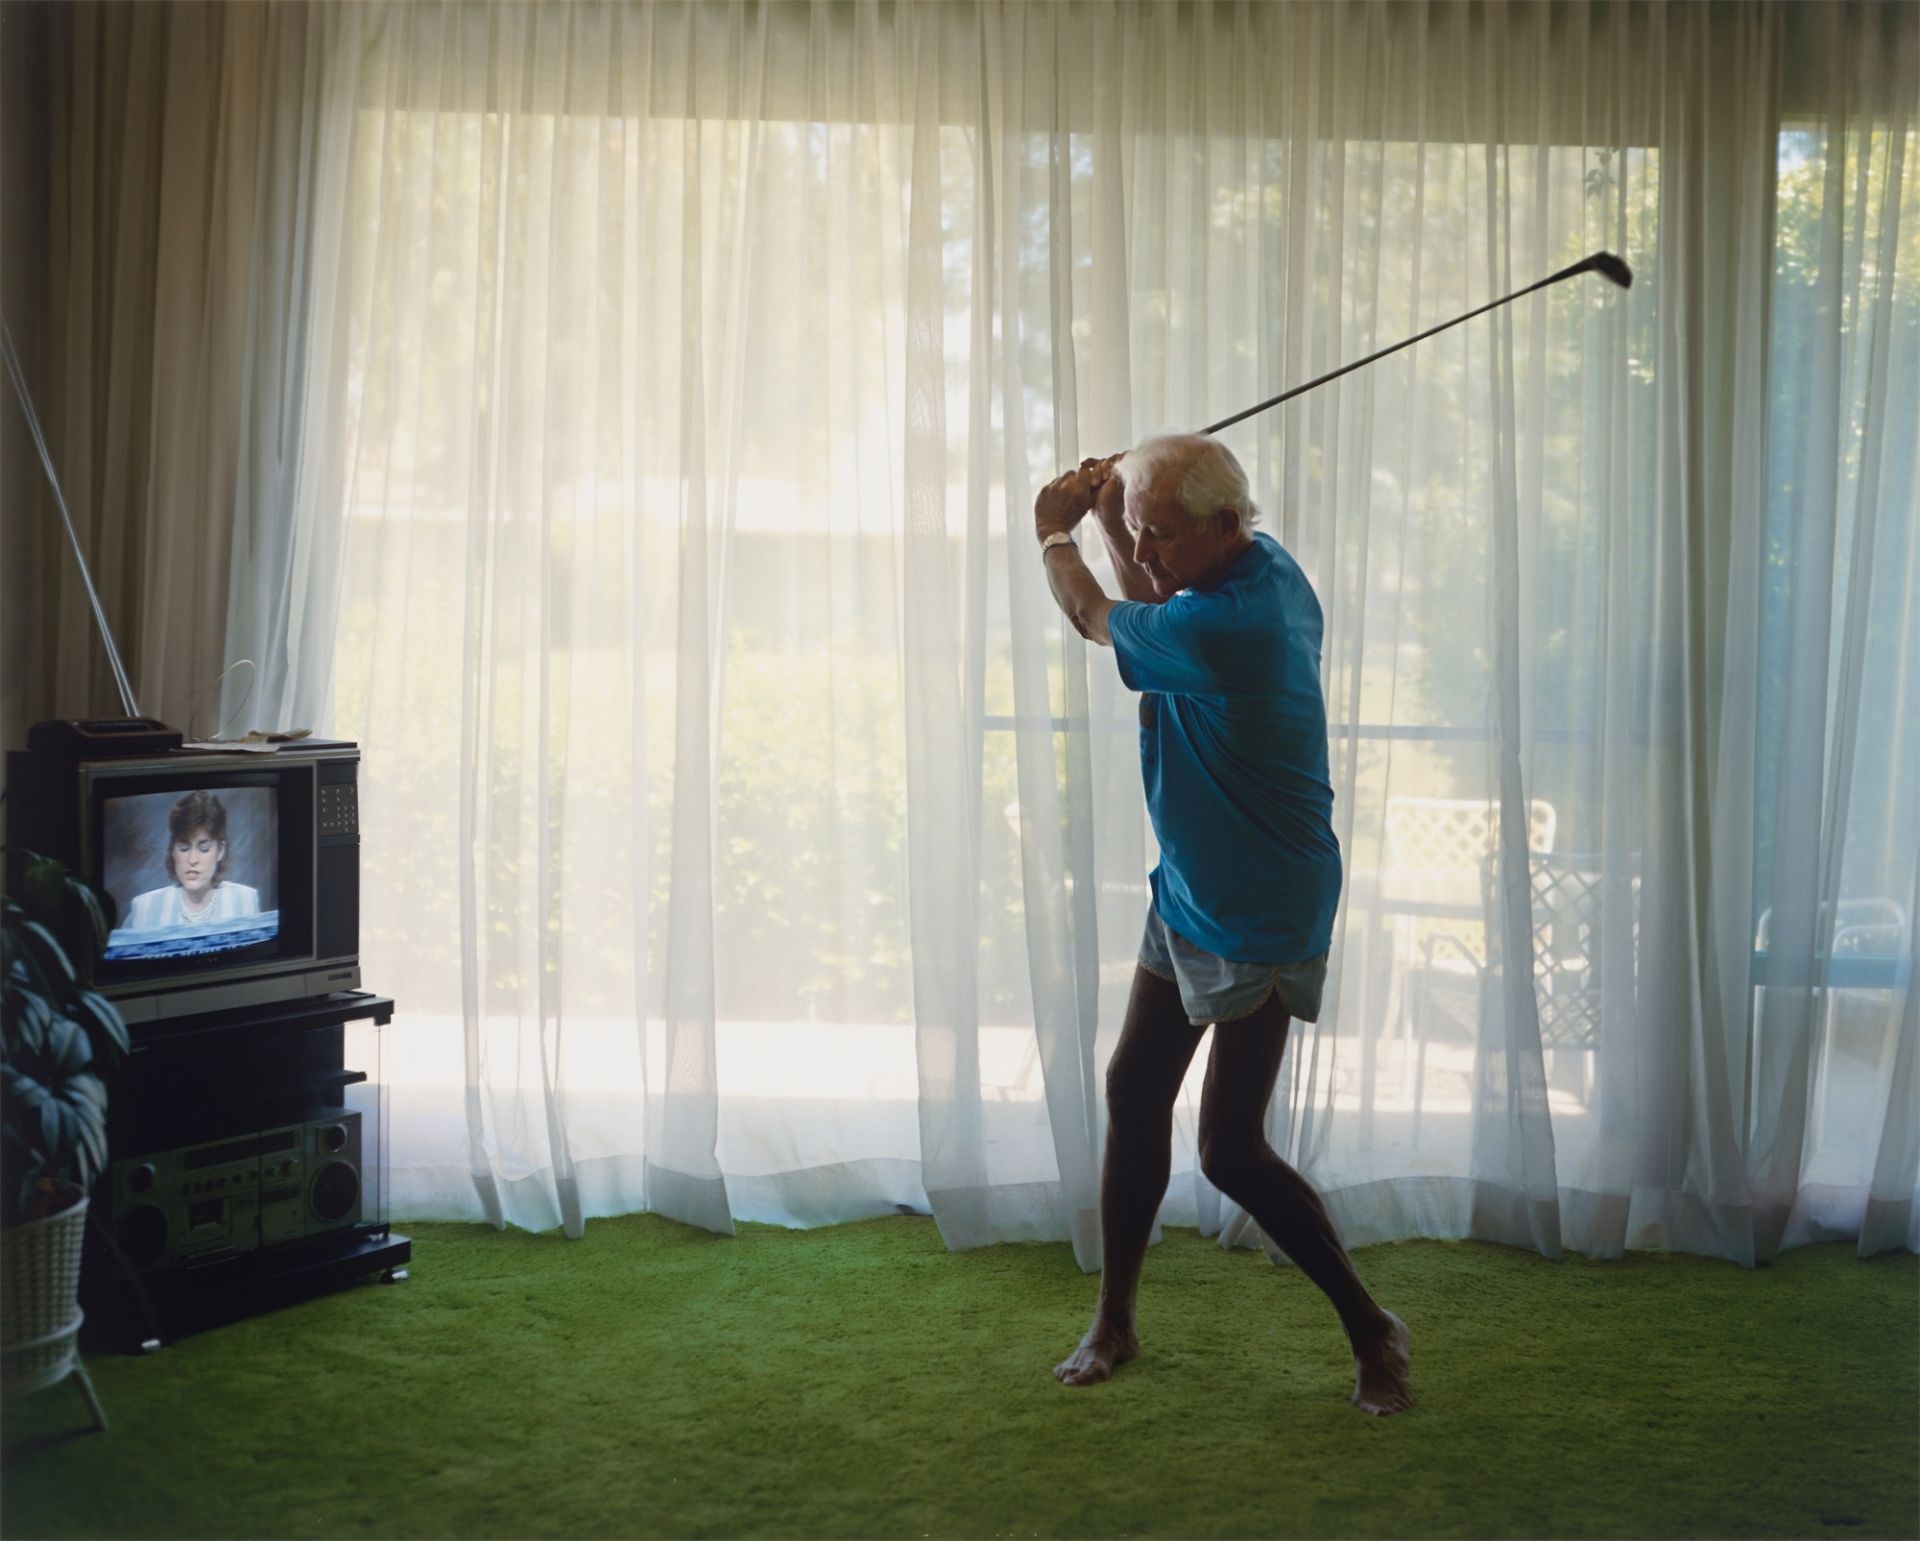 Larry Sultan. Practicing Golf Swing, aus der Serie „Pictures from Home“, 1983–1992. 1986